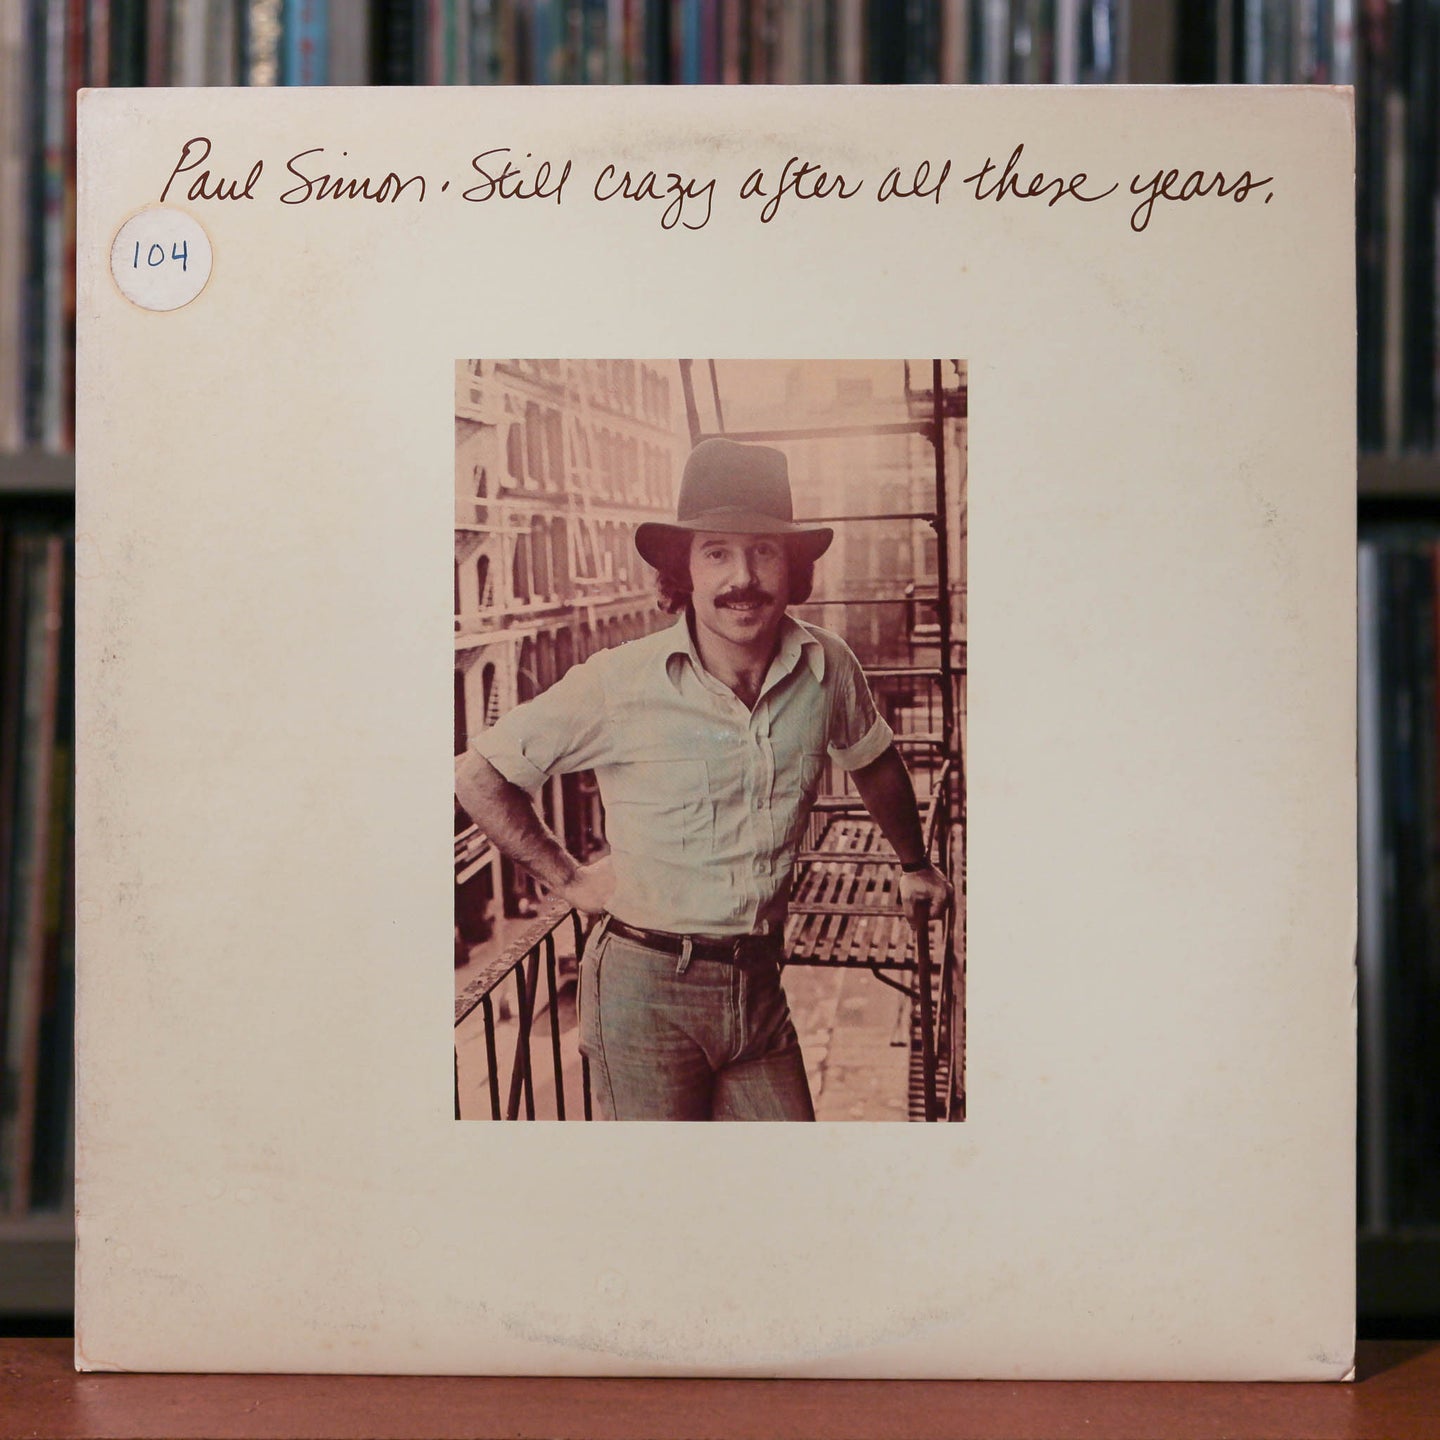 Paul Simon - 2 Album Bundle - Still Crazy After all these Years, Greatest Hits